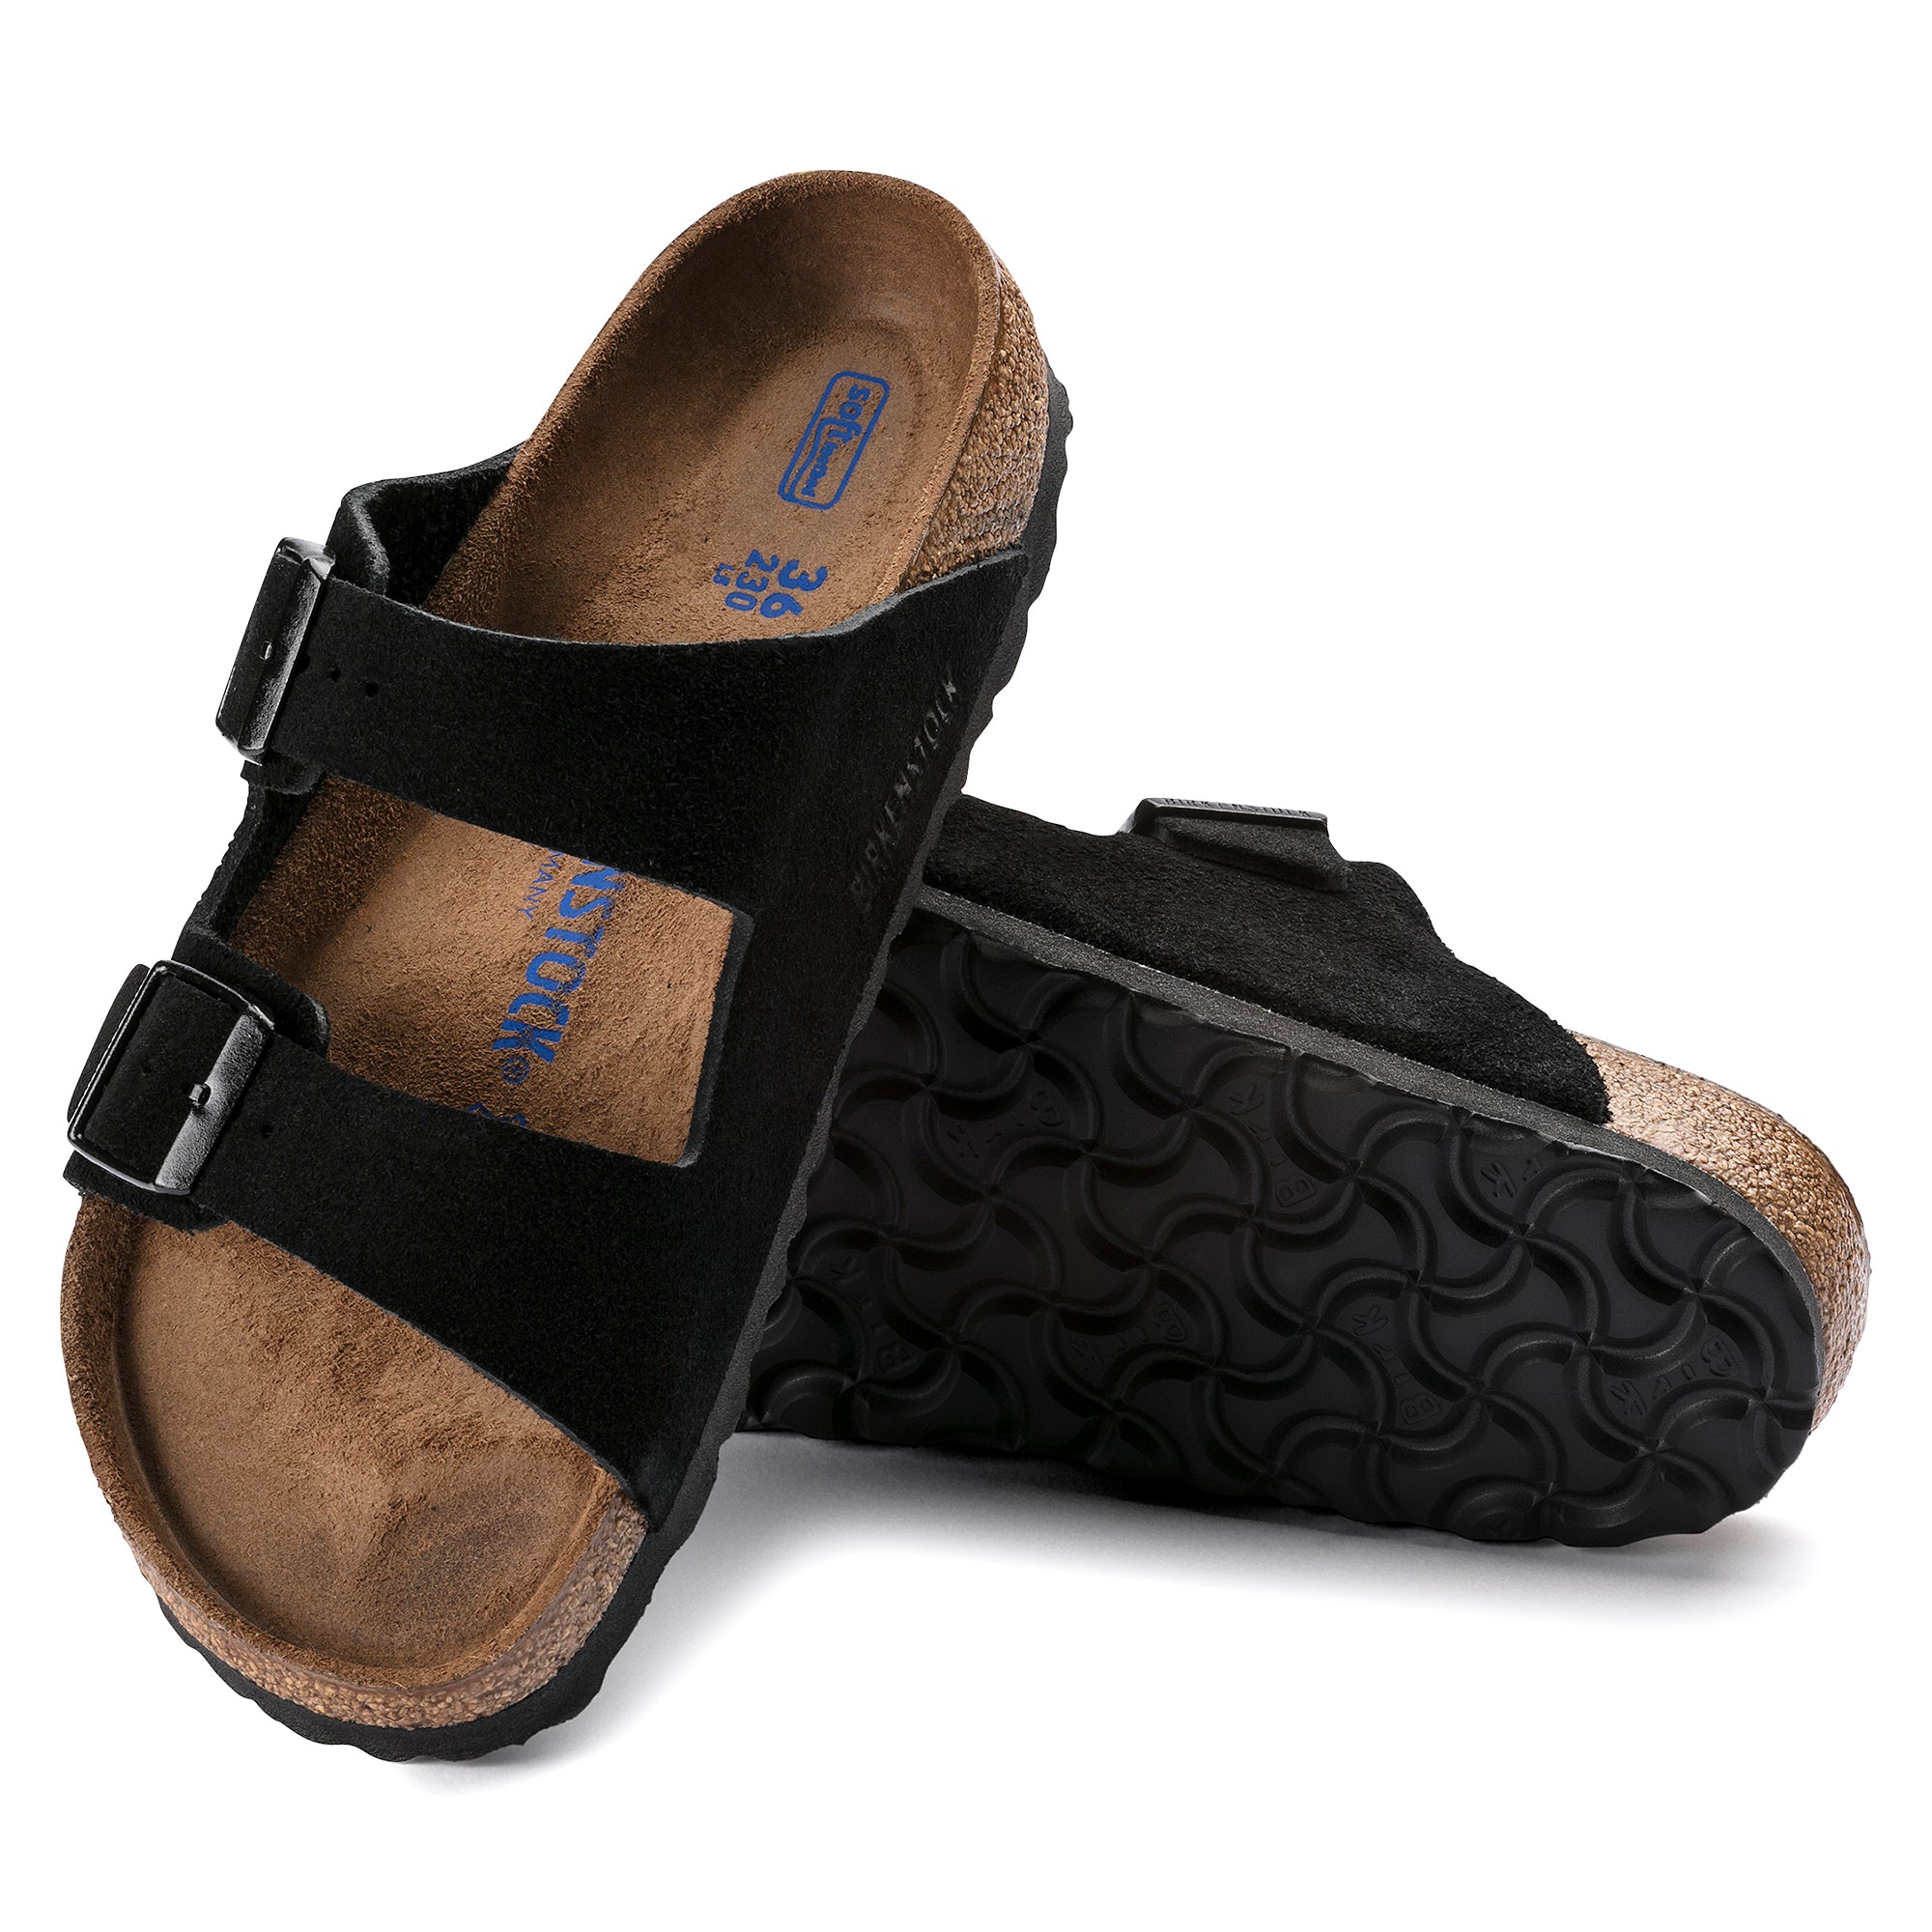 Arizona Suede Leather in Black (Soft Footbed)